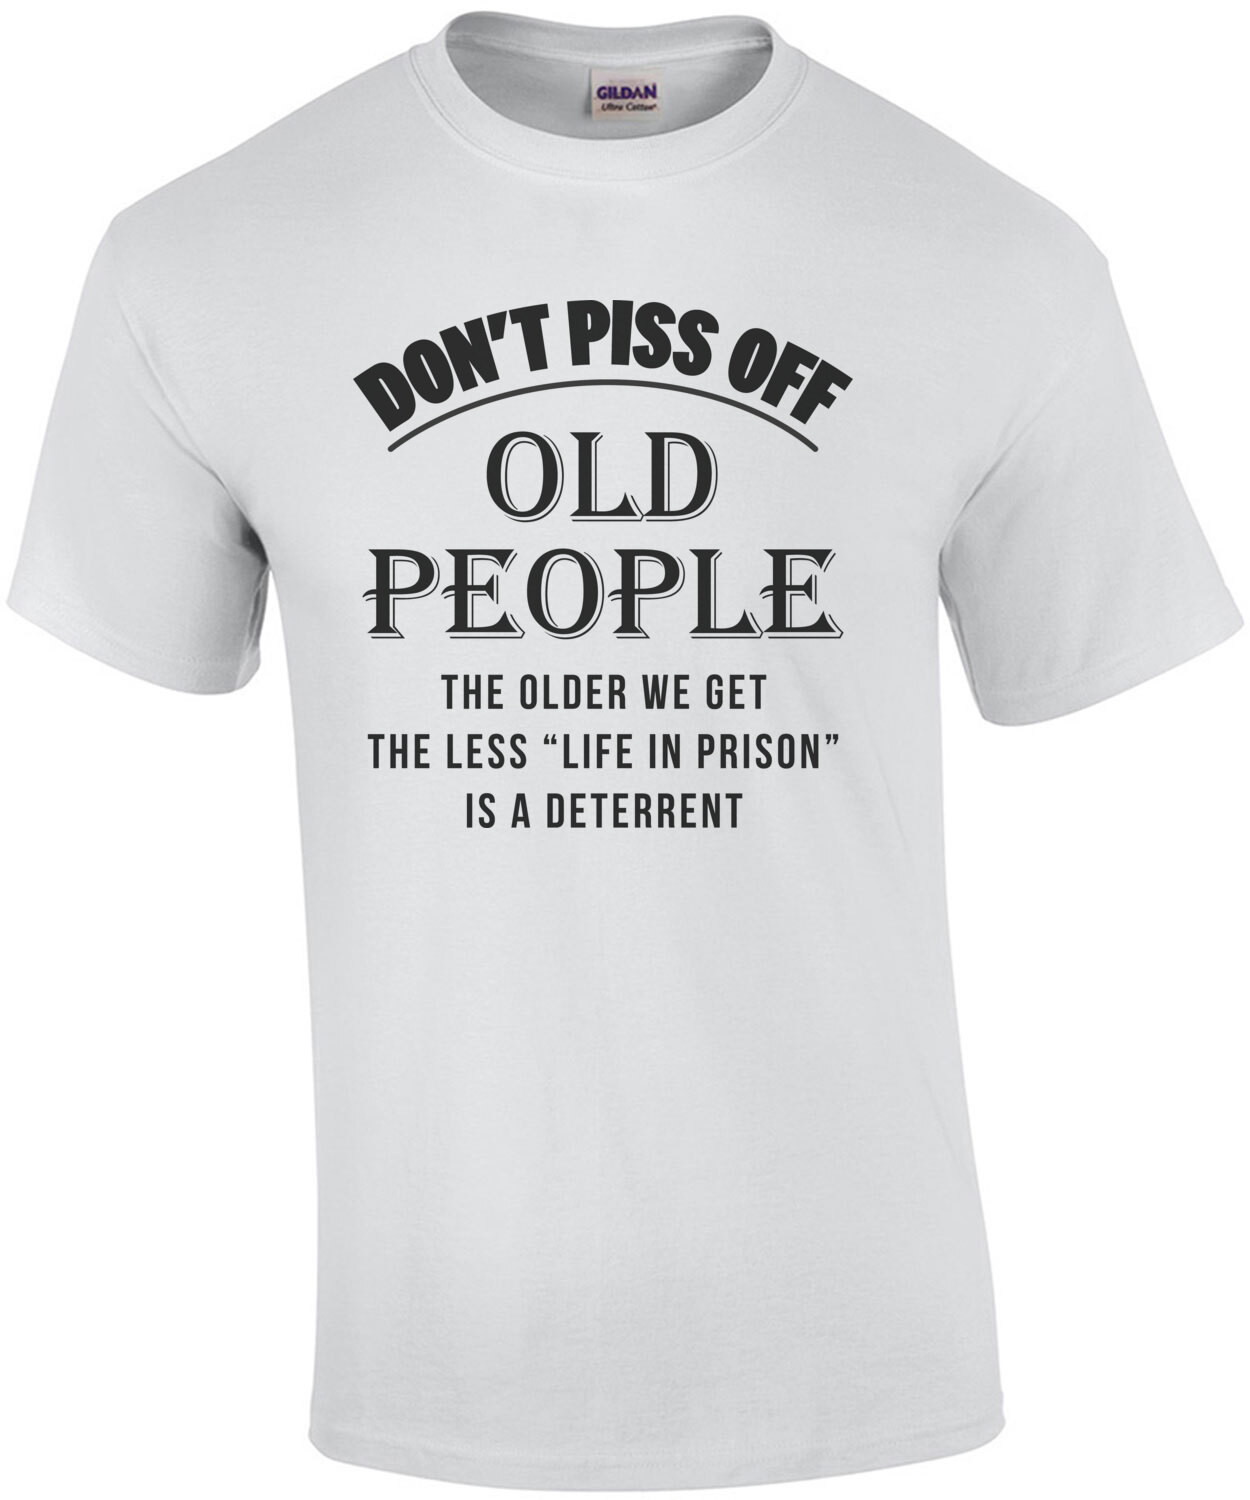 Don't piss off old people. The older we get the less life in prison is a deterrent - funny old people t-shirt